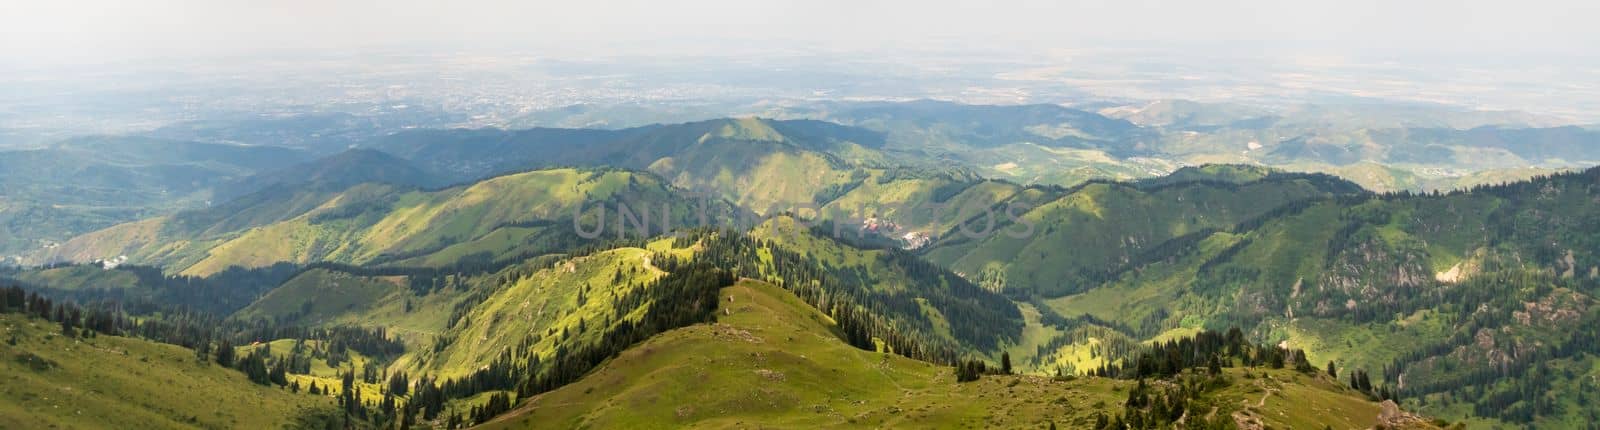 Scenic Almaty hills and mountains, panoramic view.